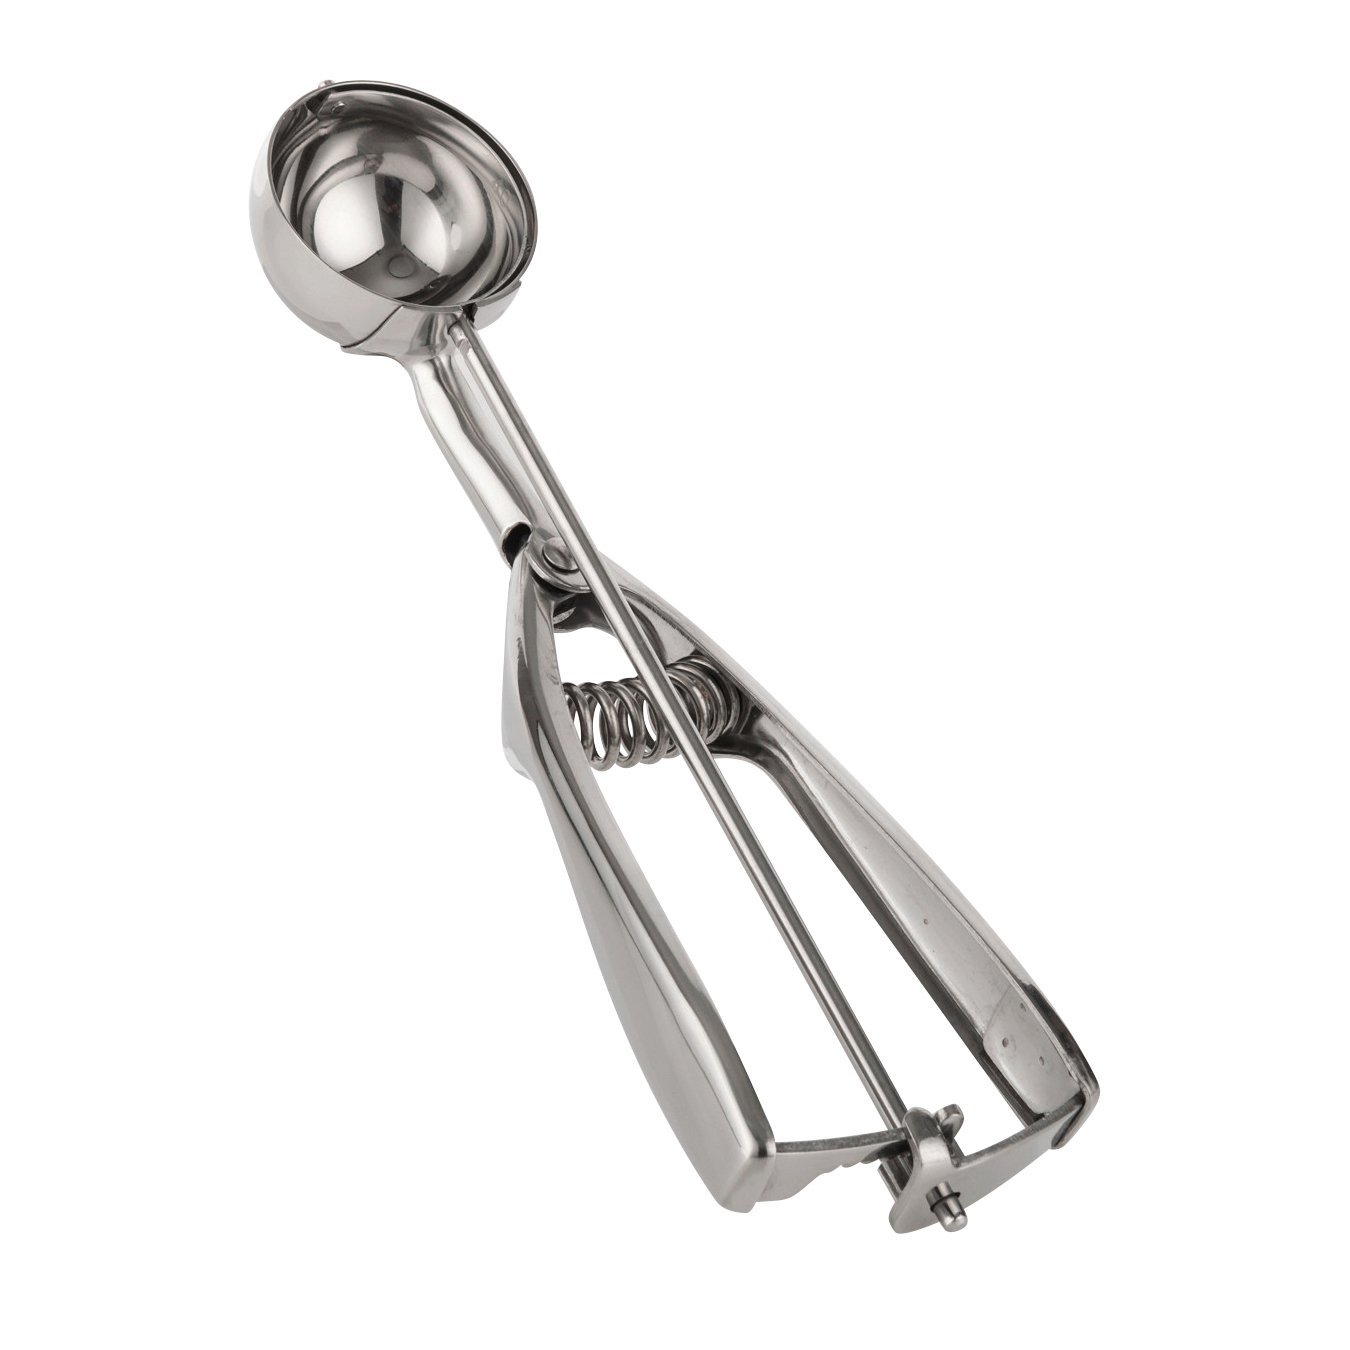 Cookie Scoop Set, Ice Cream Scoop Set, Multiple Size Large-Medium-Small  Size Disher, Professional 18/8 Stainless Steel Cupcake Scoop 